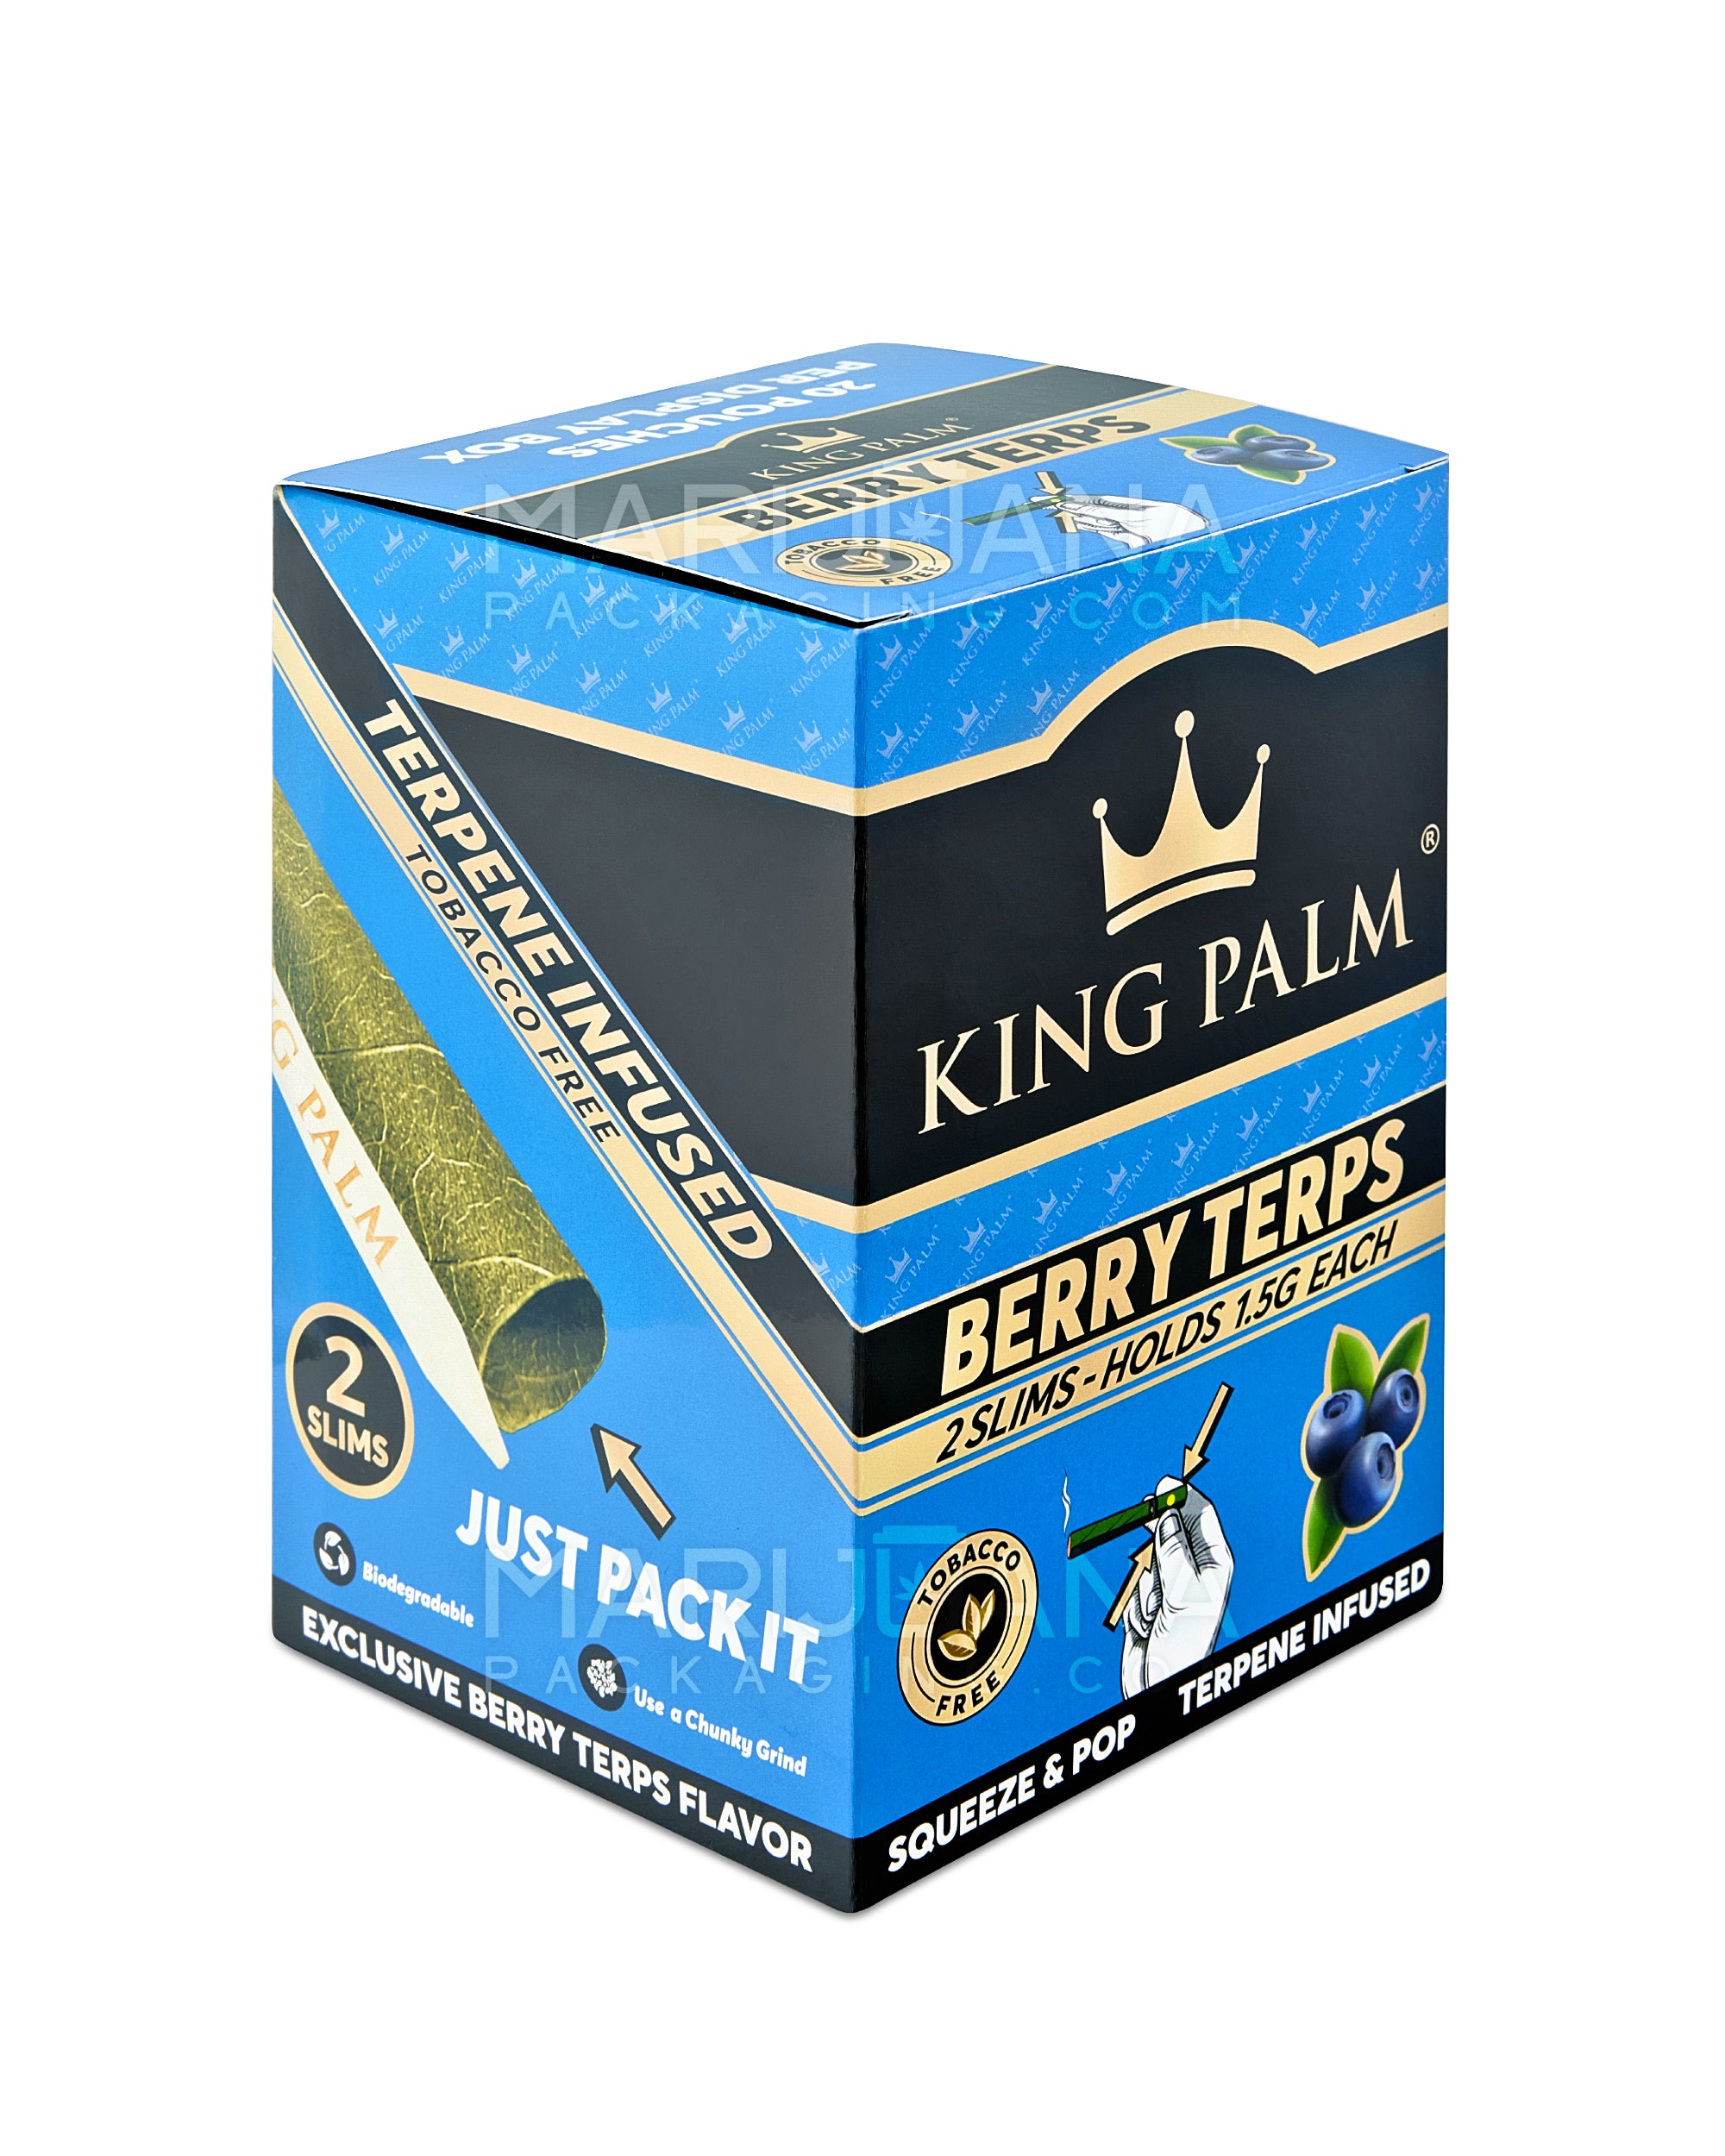 KING PALM | 'Retail Display' Slim Green Natural Leaf Blunt Wraps | 104mm - Berry Terps - 20 Count